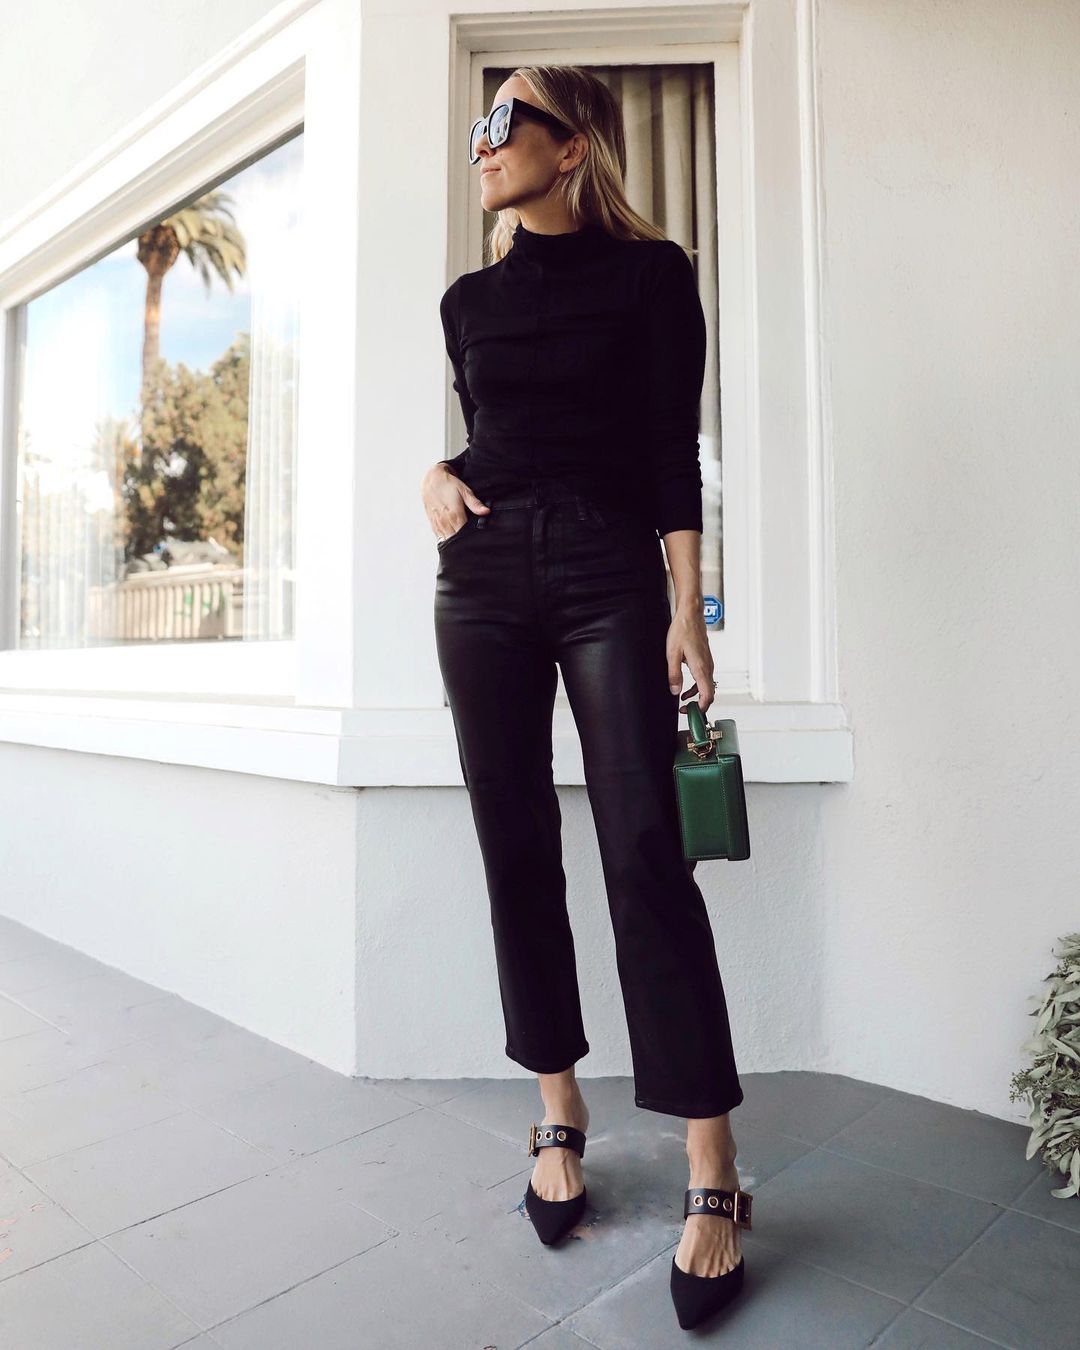 Instagram star Jacey Duprie in an all-black outfit idea with turtleneck faux leather jeans, and pointed-toe mule heels